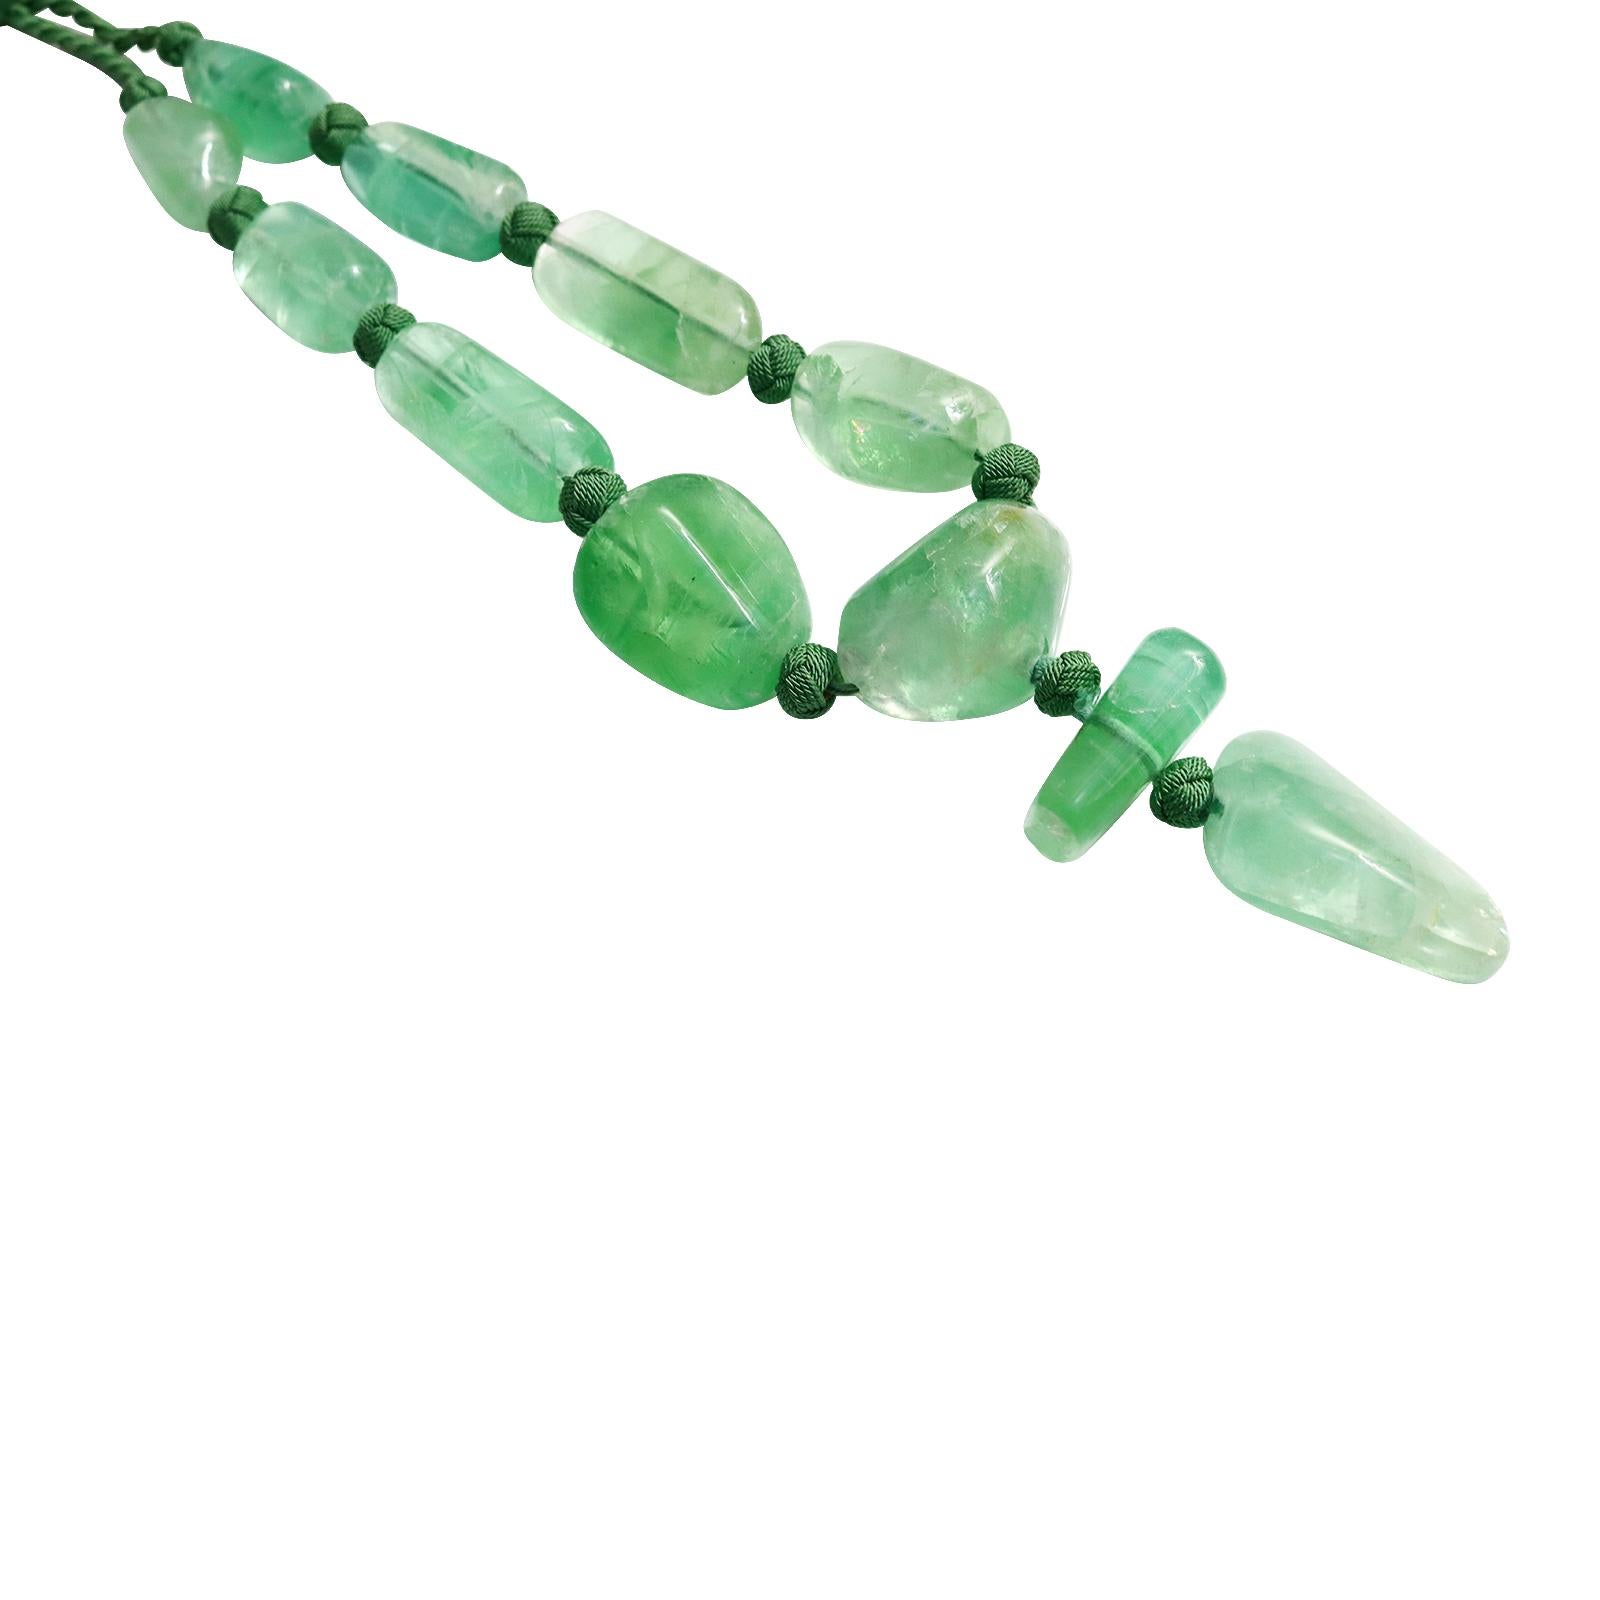 Women's or Men's Vintage Monies Green Polished Quartz on Silk Knotted Cord Necklace Circa 2000s